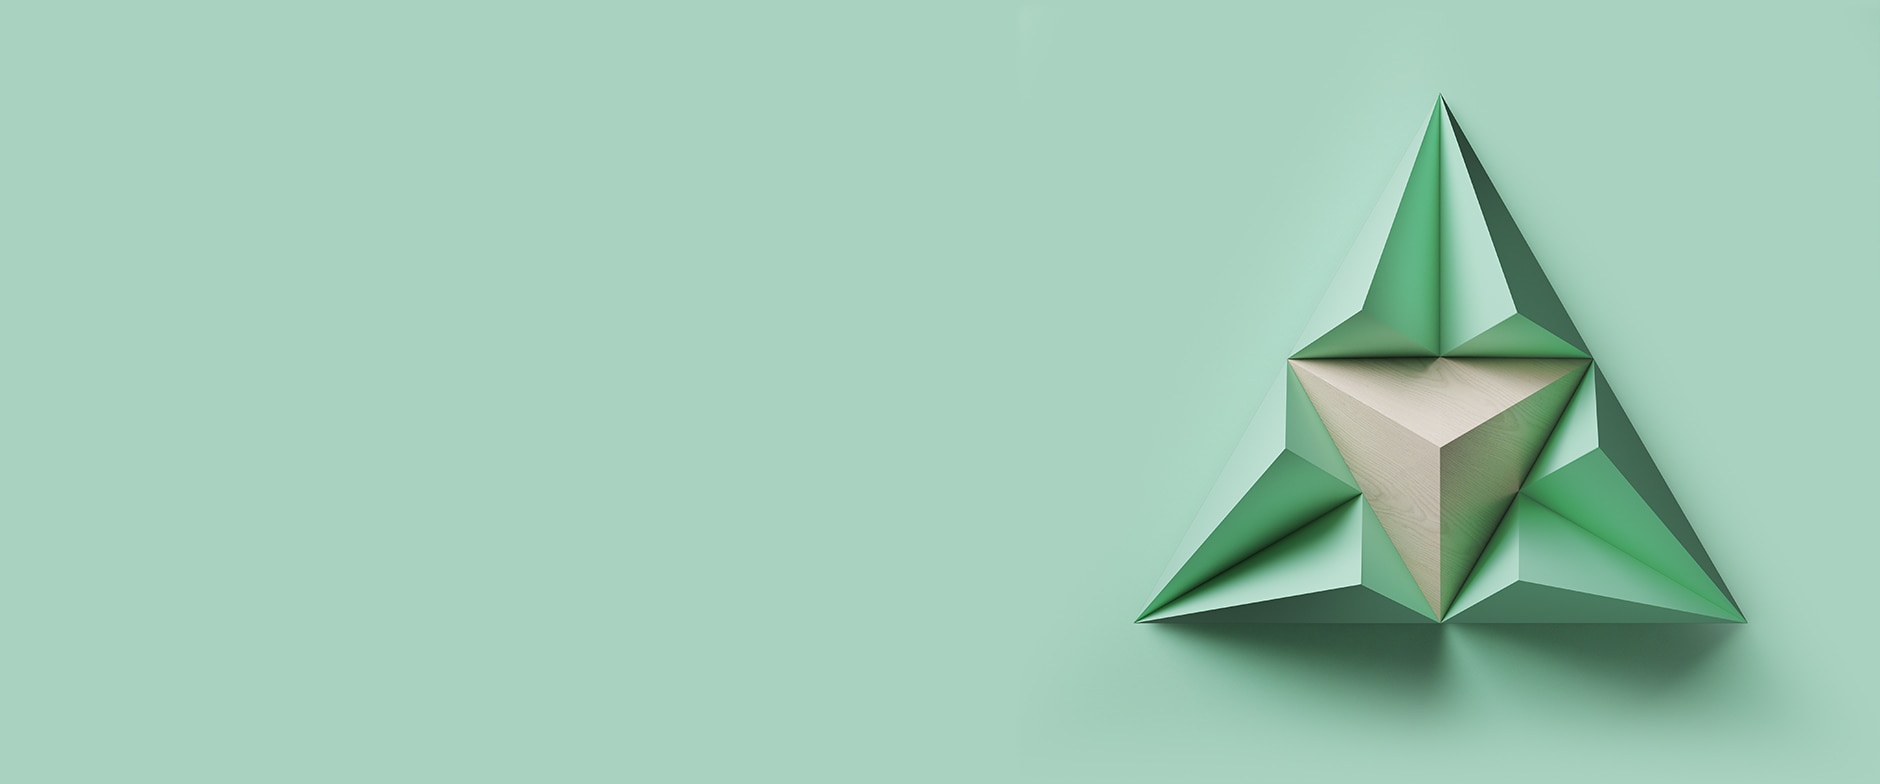 green and white triangular objects